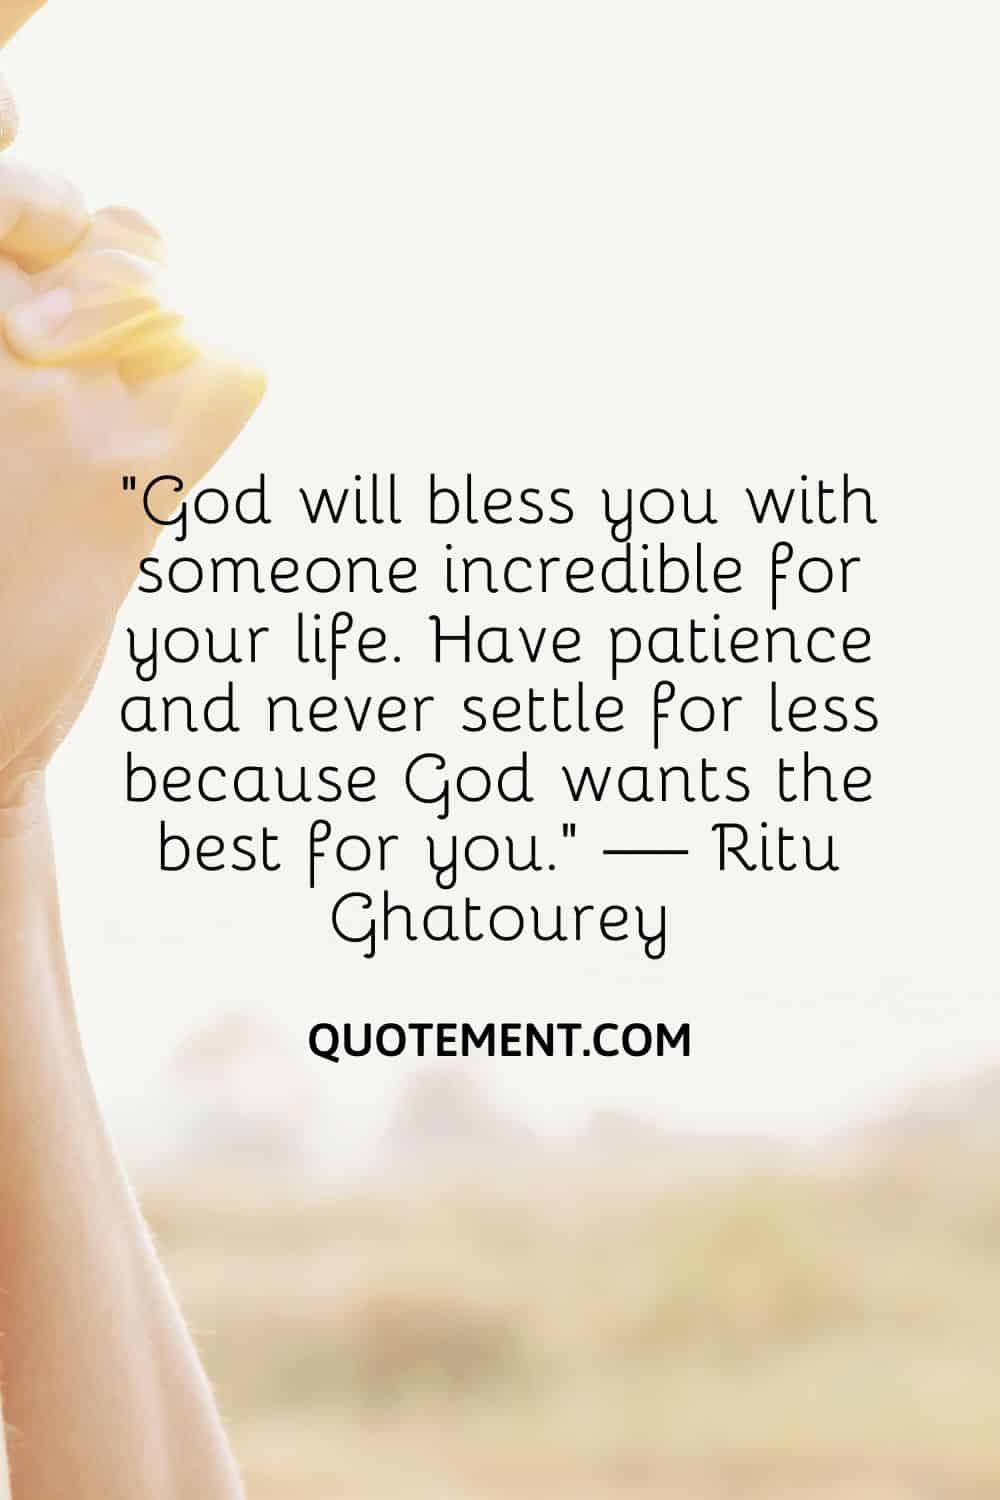 “God will bless you with someone incredible for your life. Have patience and never settle for less because God wants the best for you.” — Ritu Ghatourey